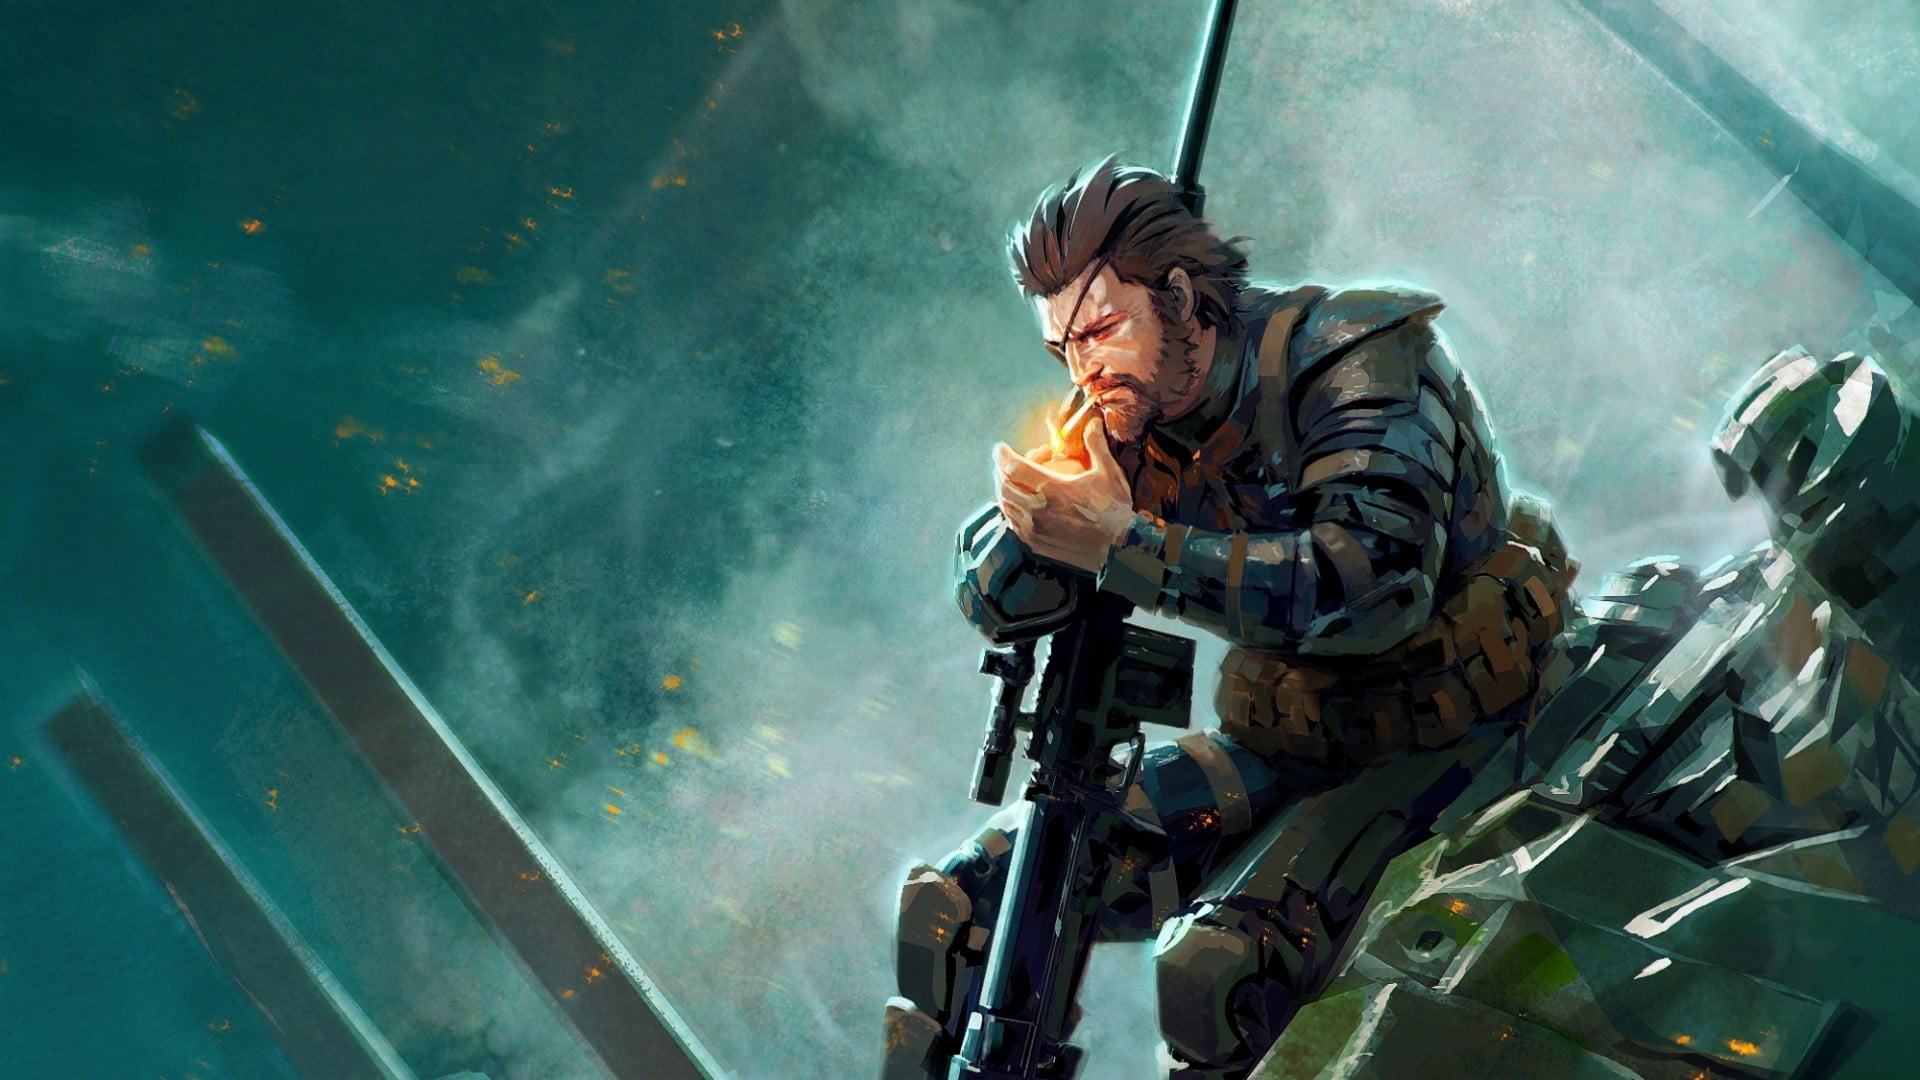 man in blue armored suit holding rifle illustration, Metal Gear Solid V: The Phantom Pain